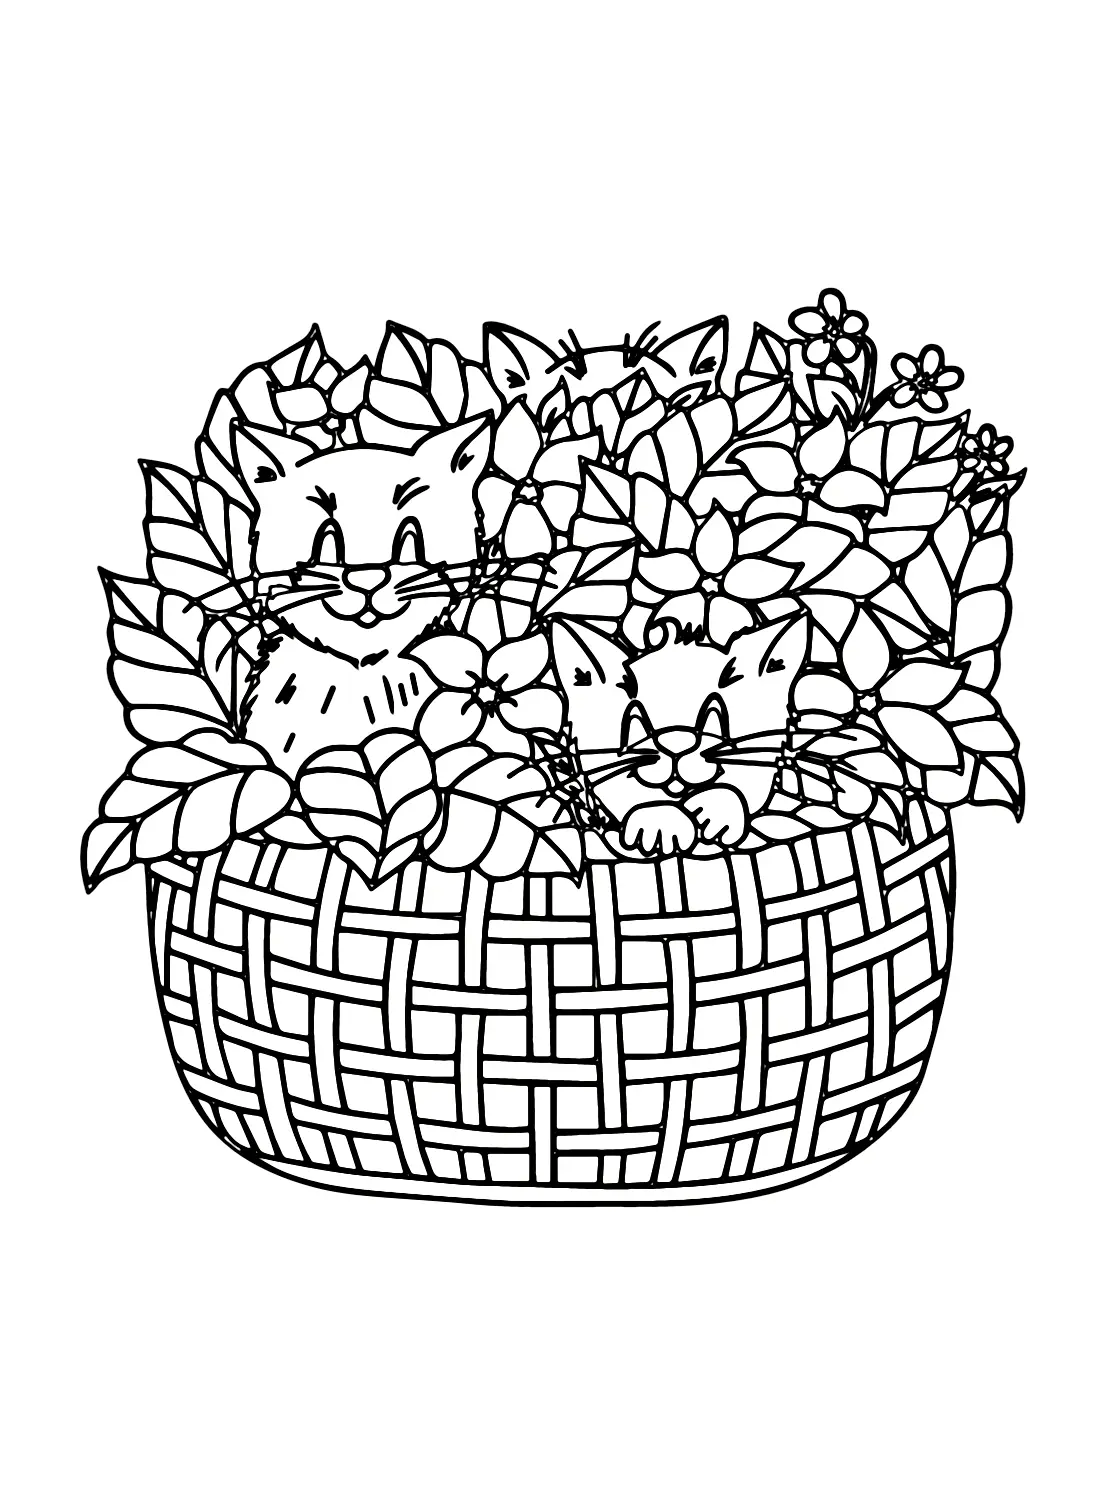 Flower Basket Coloring Pages